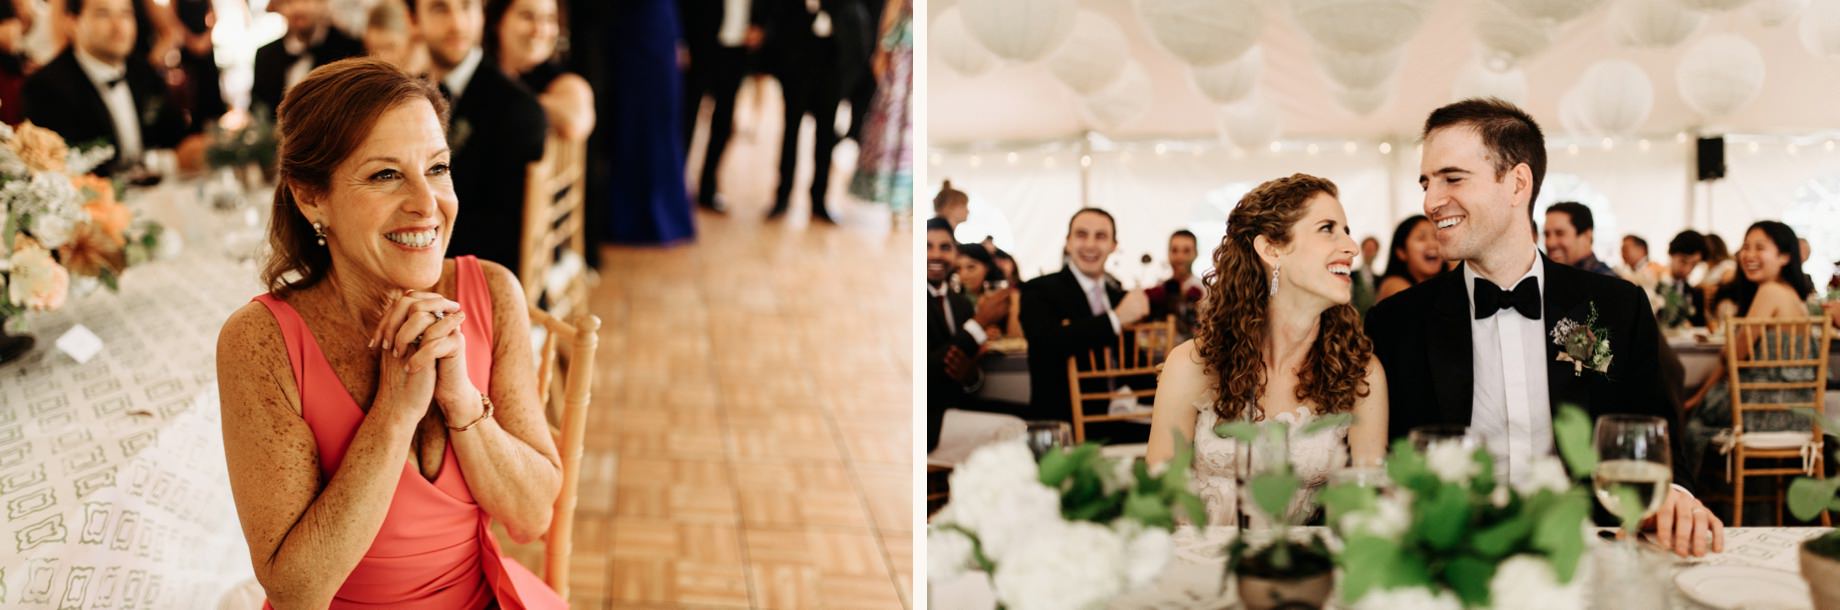 reactions to wedding toasts